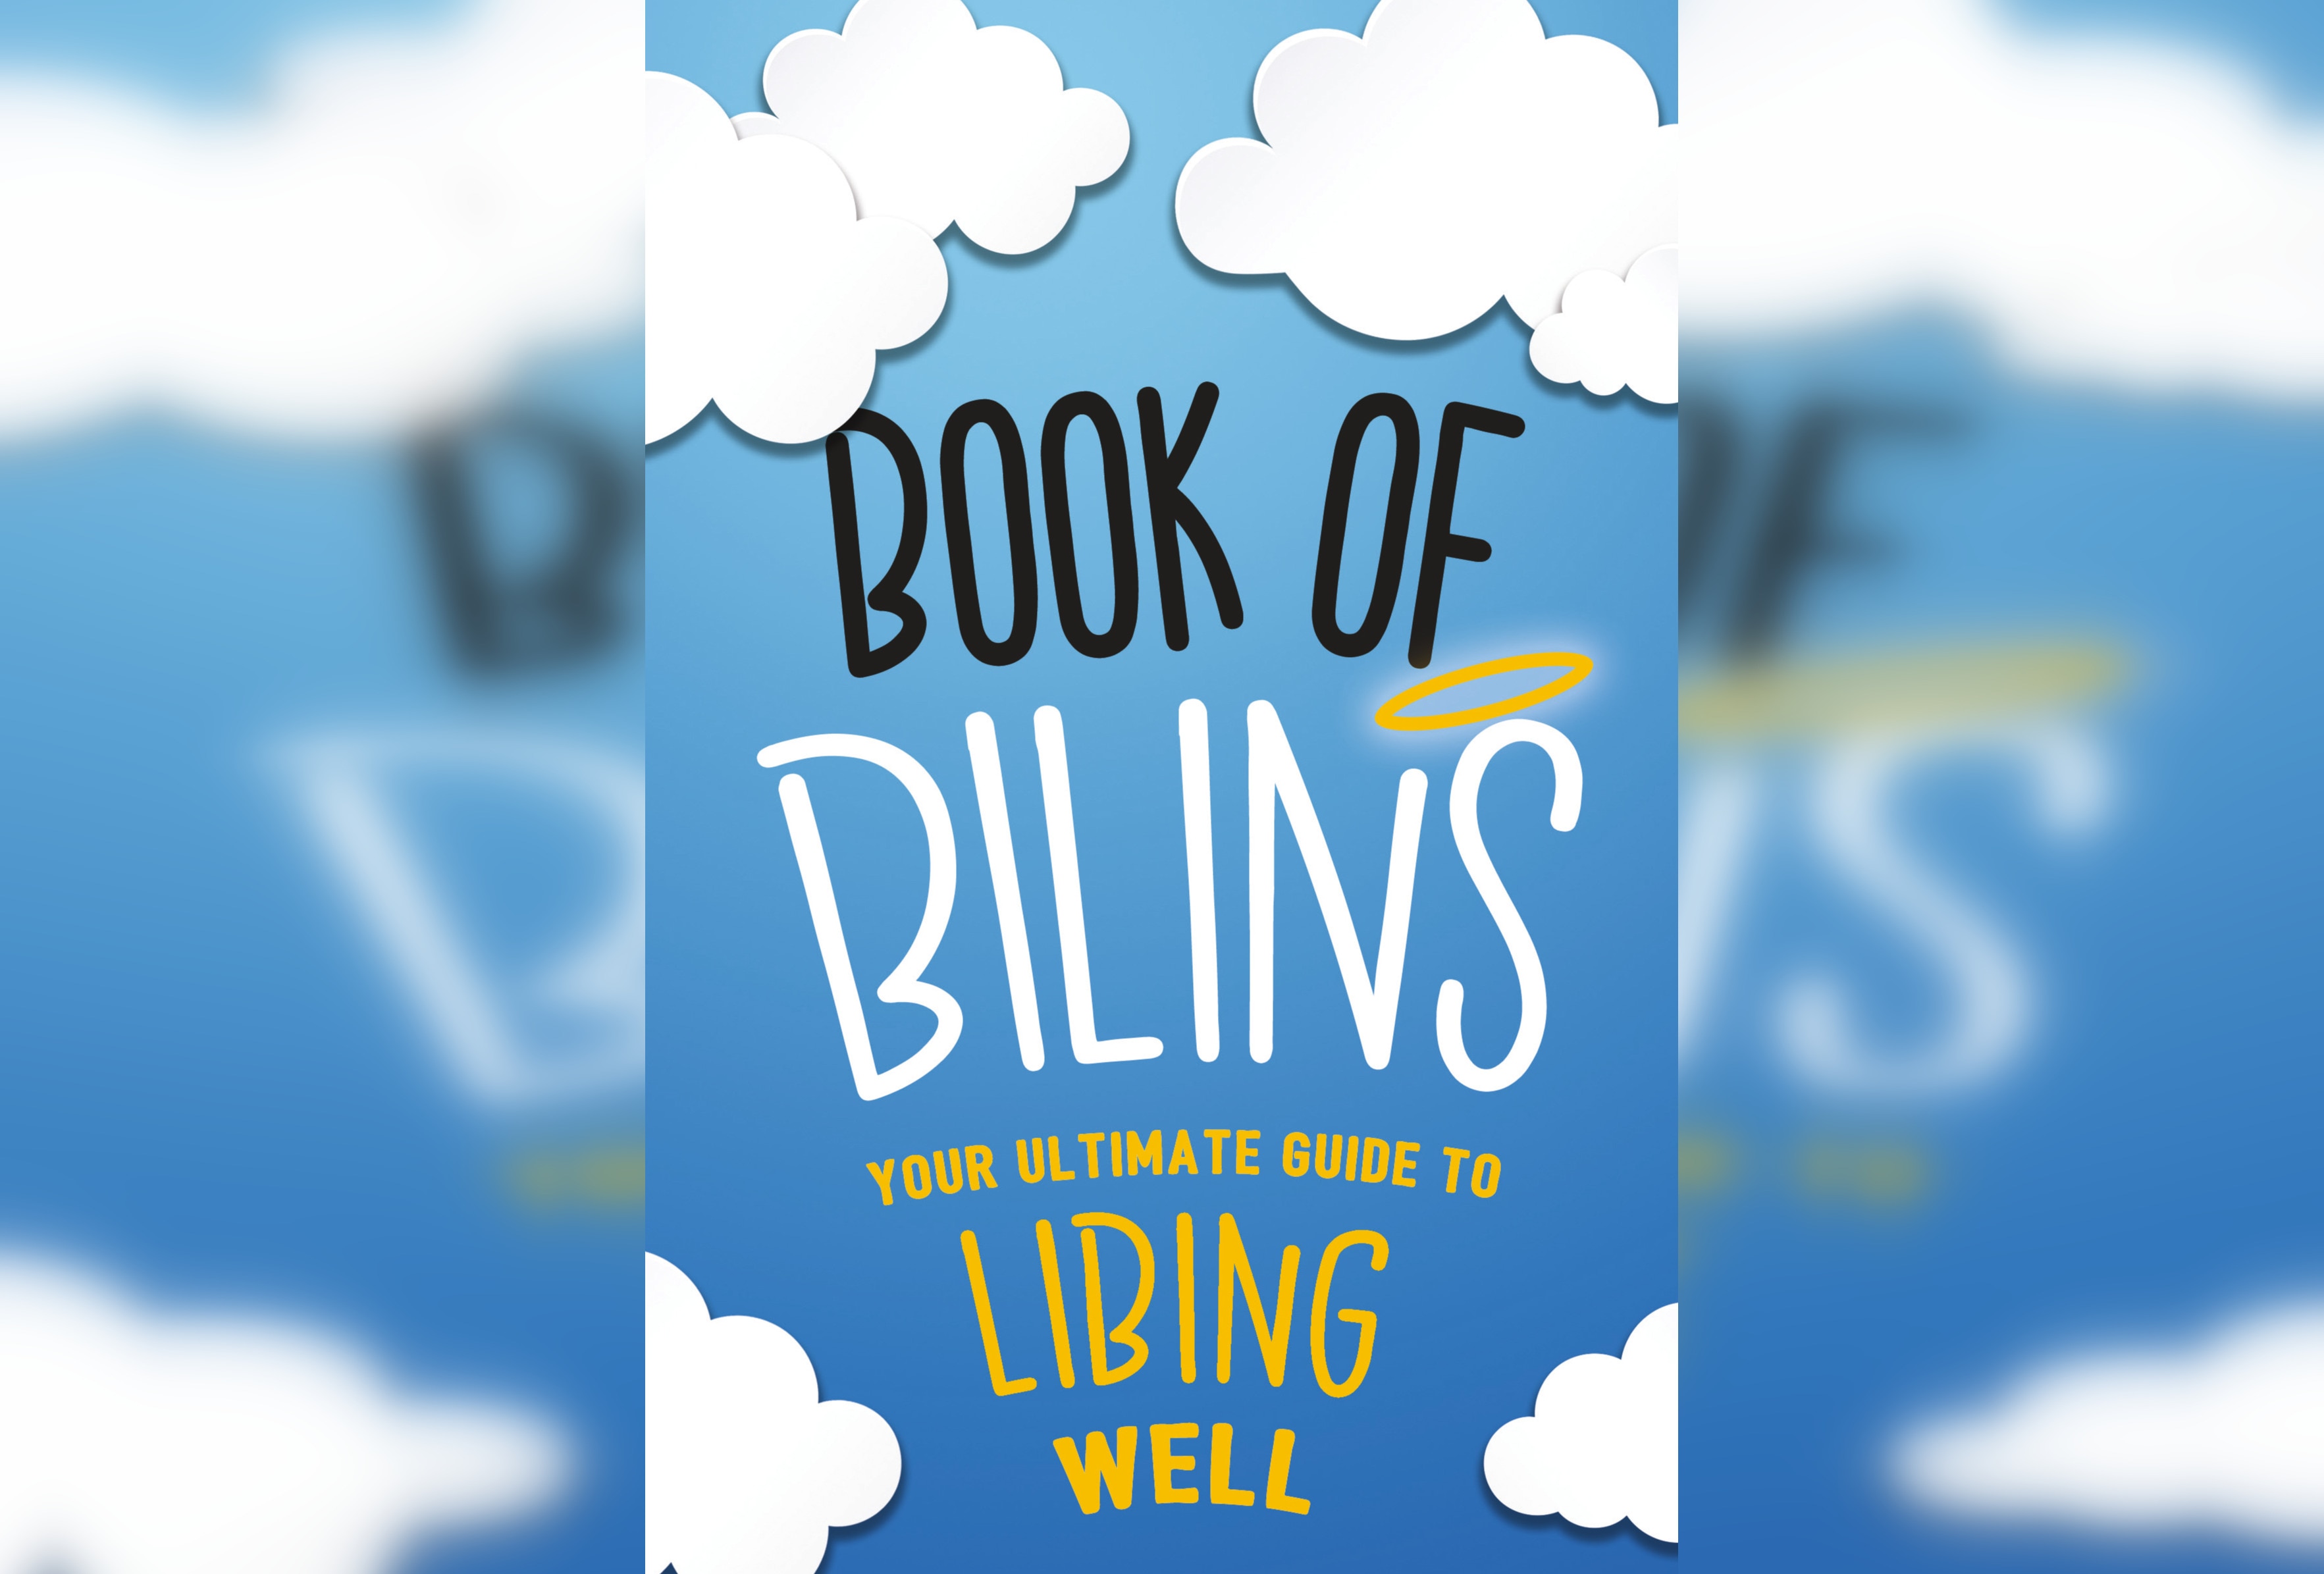 Secure your afterlife with the help of the “Book Of Bilins”